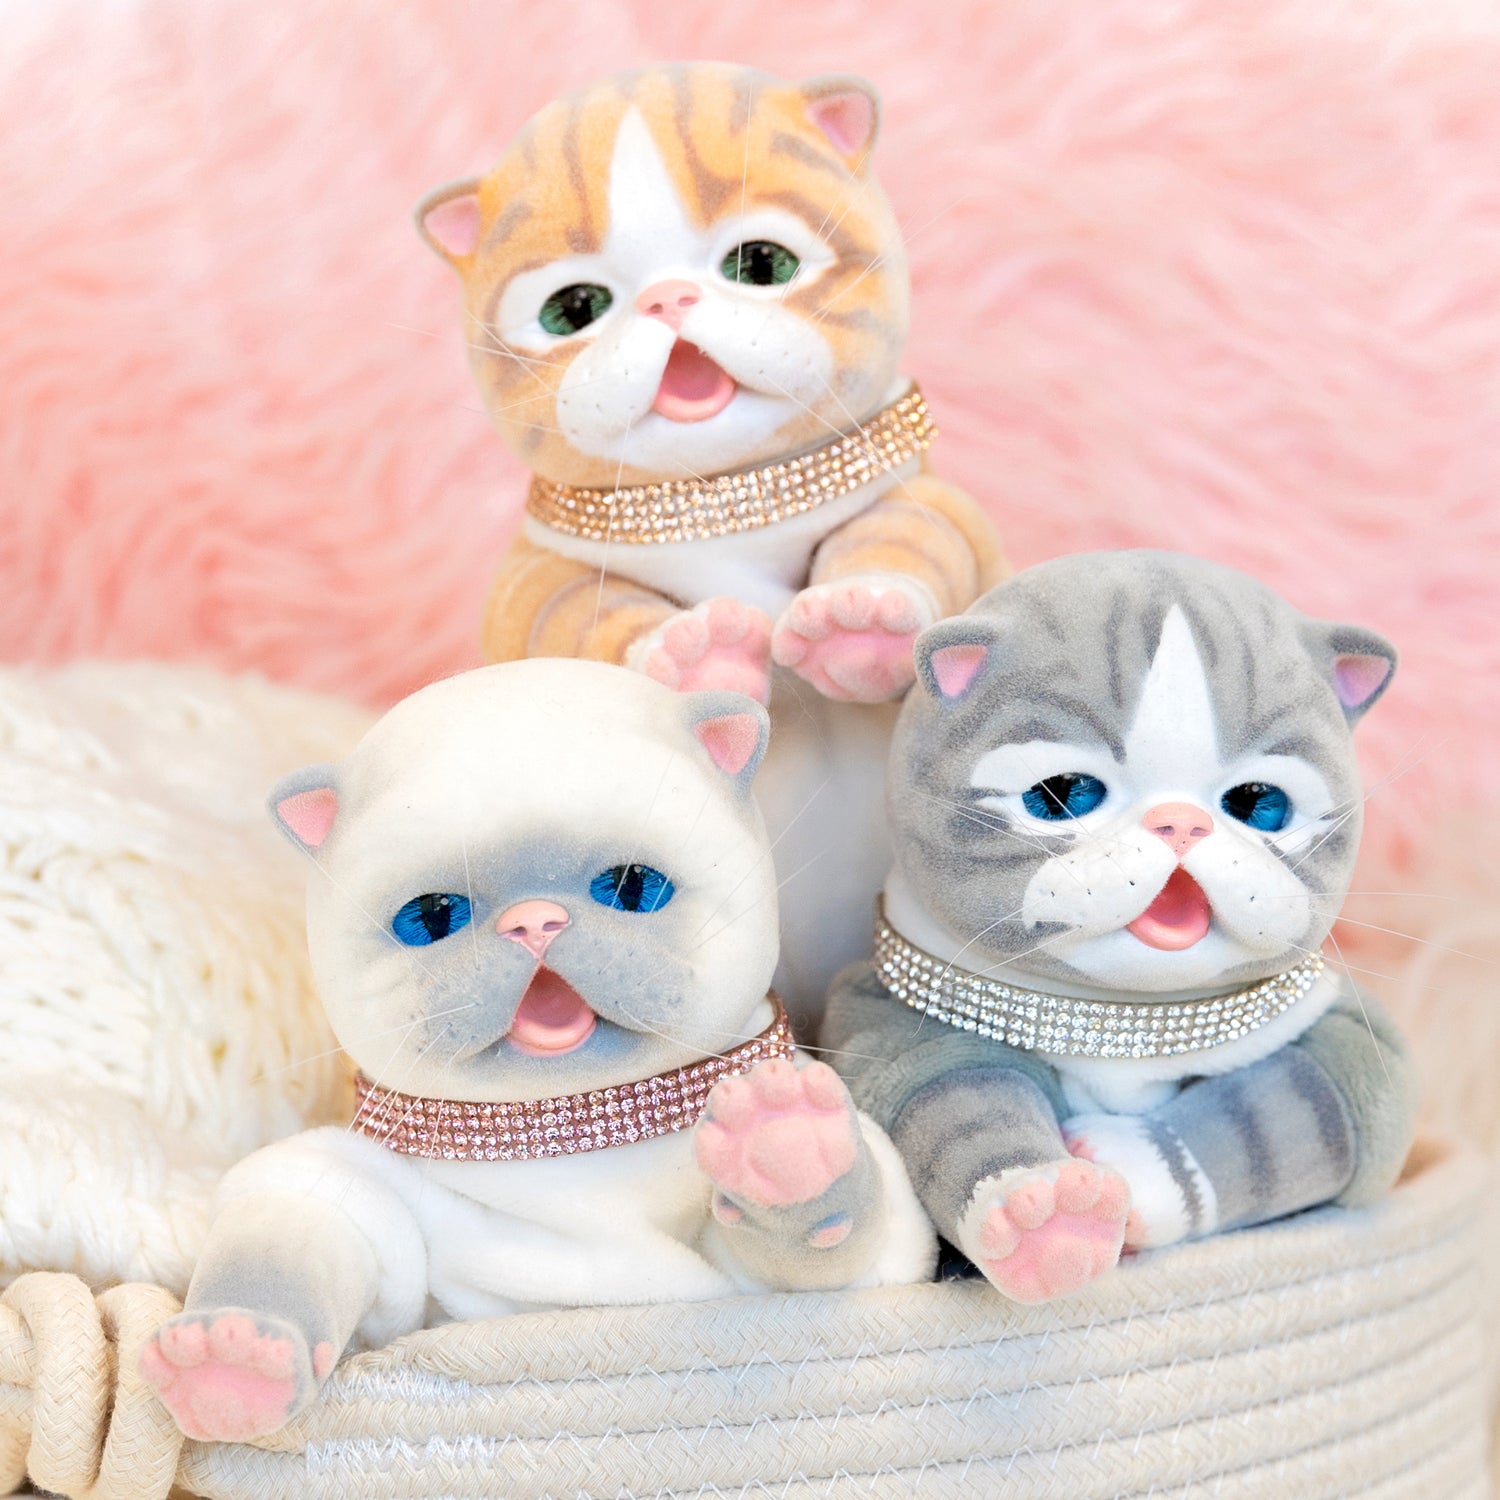 9-inch realistic Baby Tabby Kitten doll inspired by an American Shorthair kitten. Sculpted by world-renowned artist Ping Lau, the Furever Babies Kitten collection by PG is made from our premium vinyl that is flocked for a velvety finish and a weighted plush body for that wonderfully lifelike feel